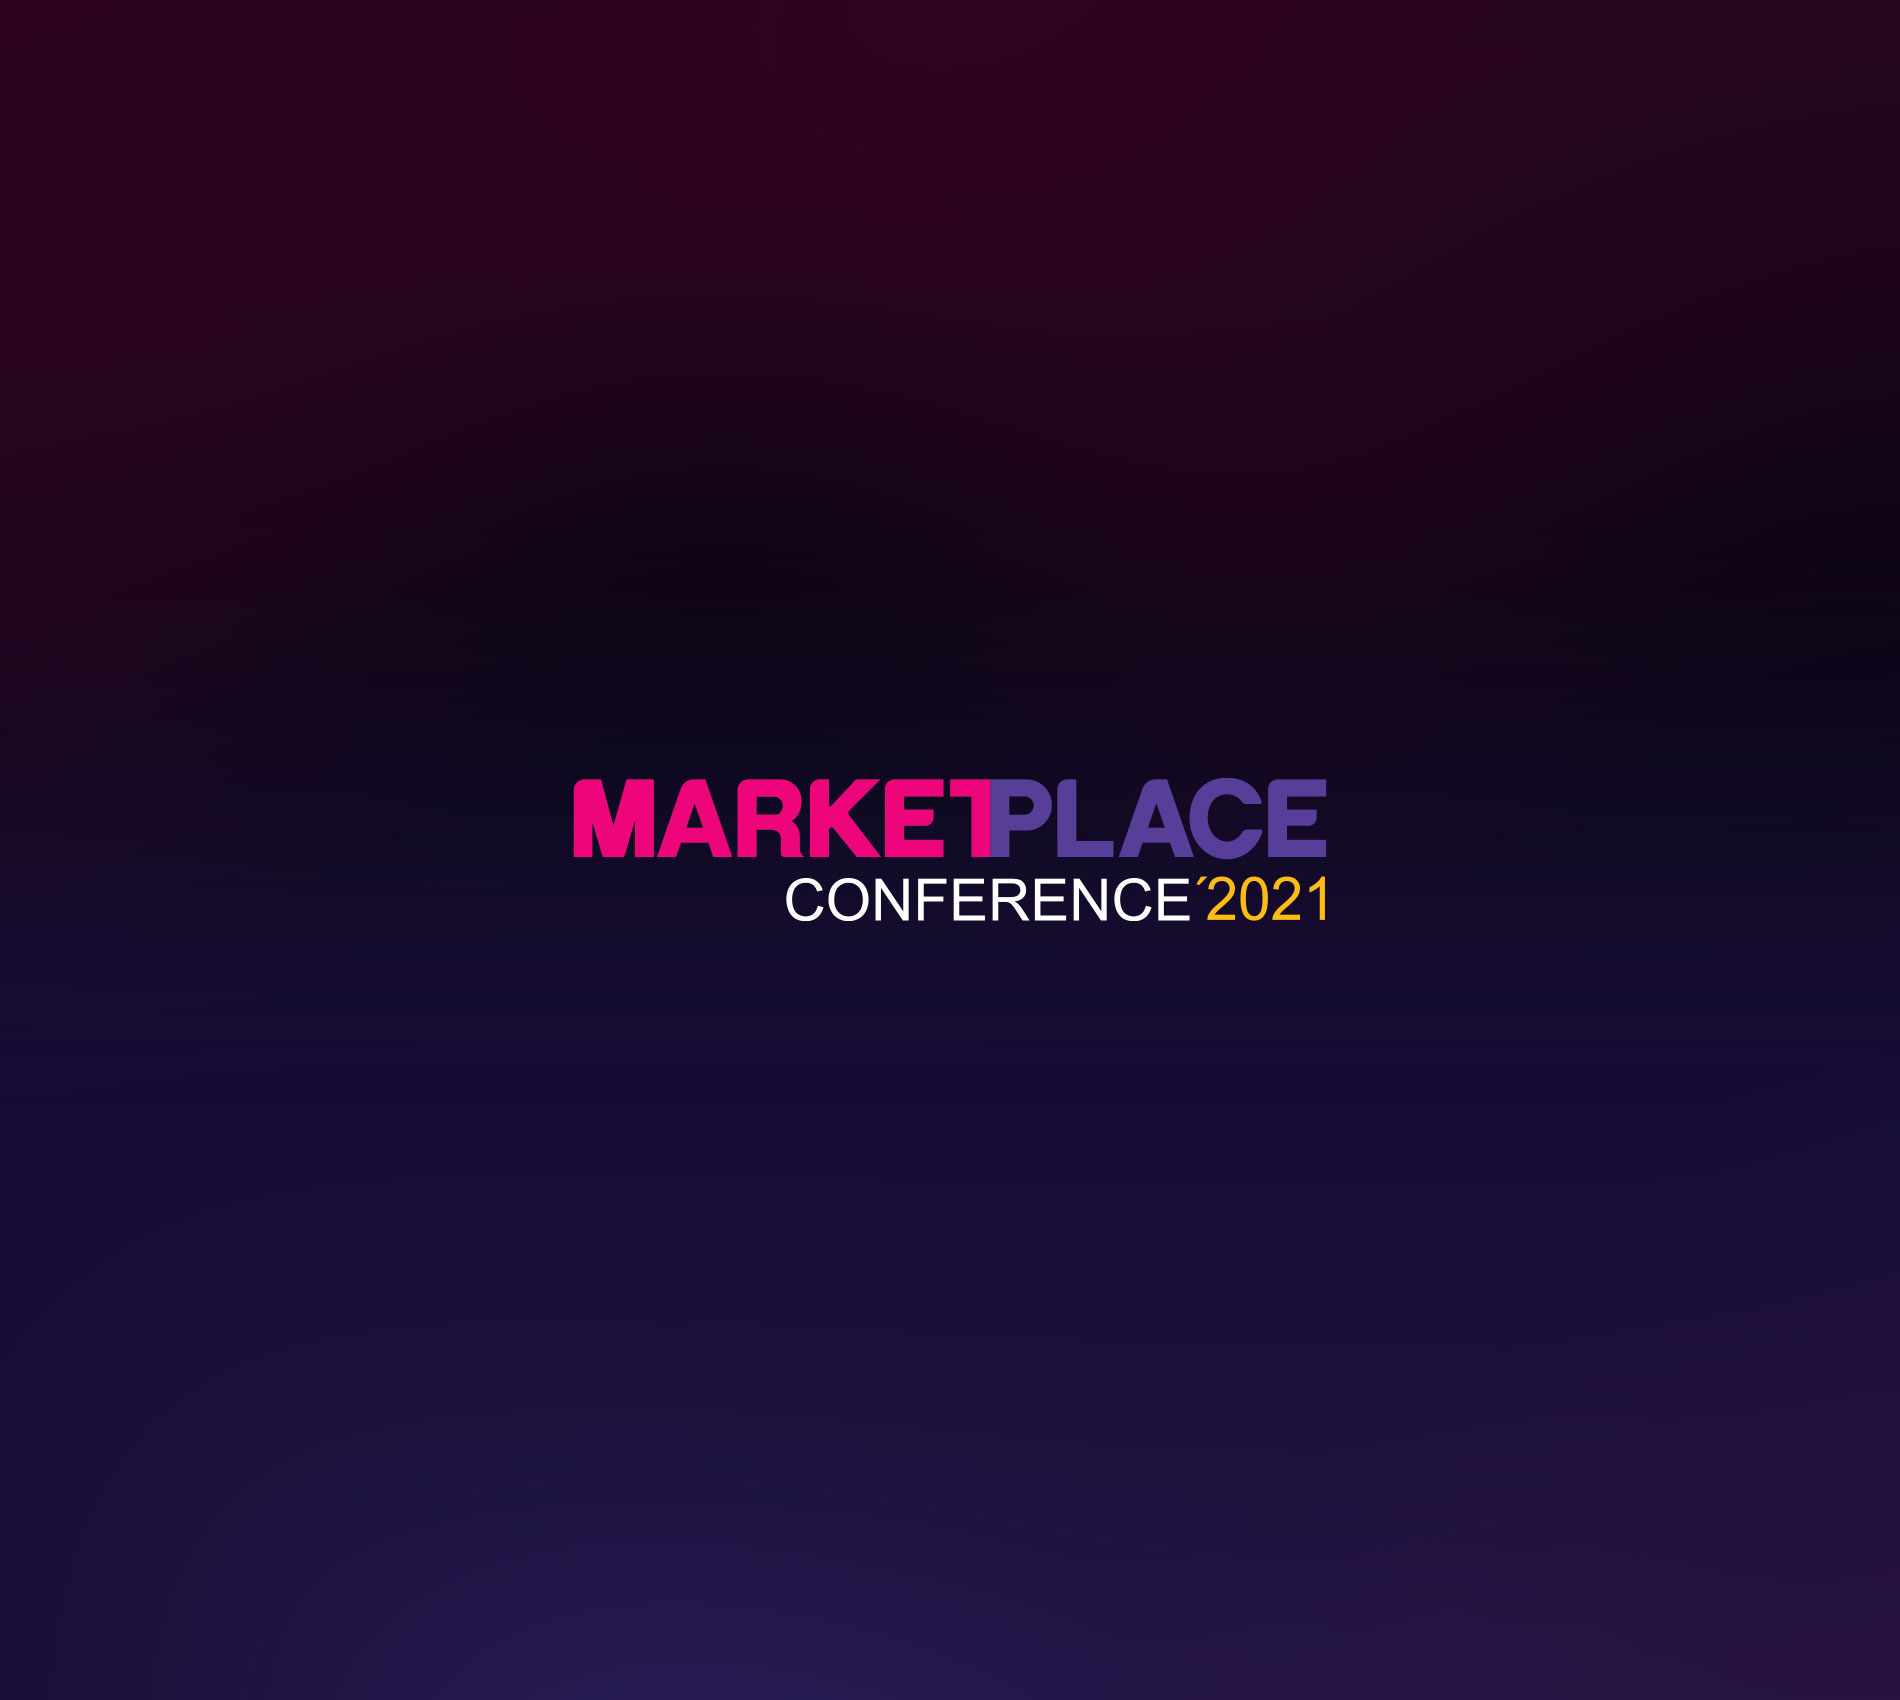 Marketplace Conference | March 2021